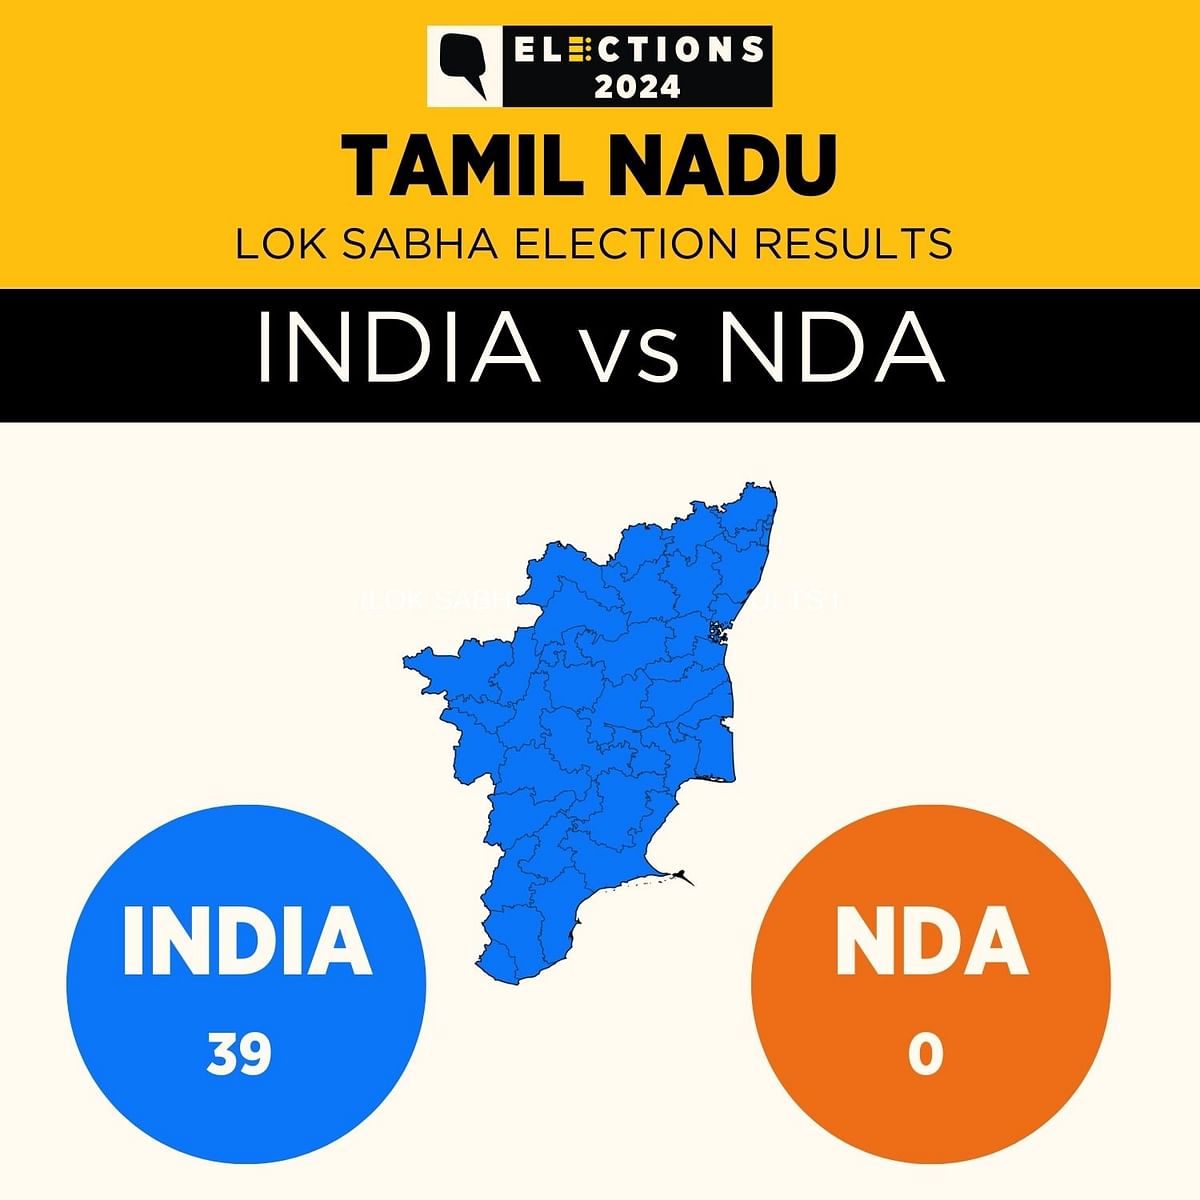 Even though PM Modi made 25 visits to the five states, the INDIA bloc outshined the NDA in TN and retained Kerala.